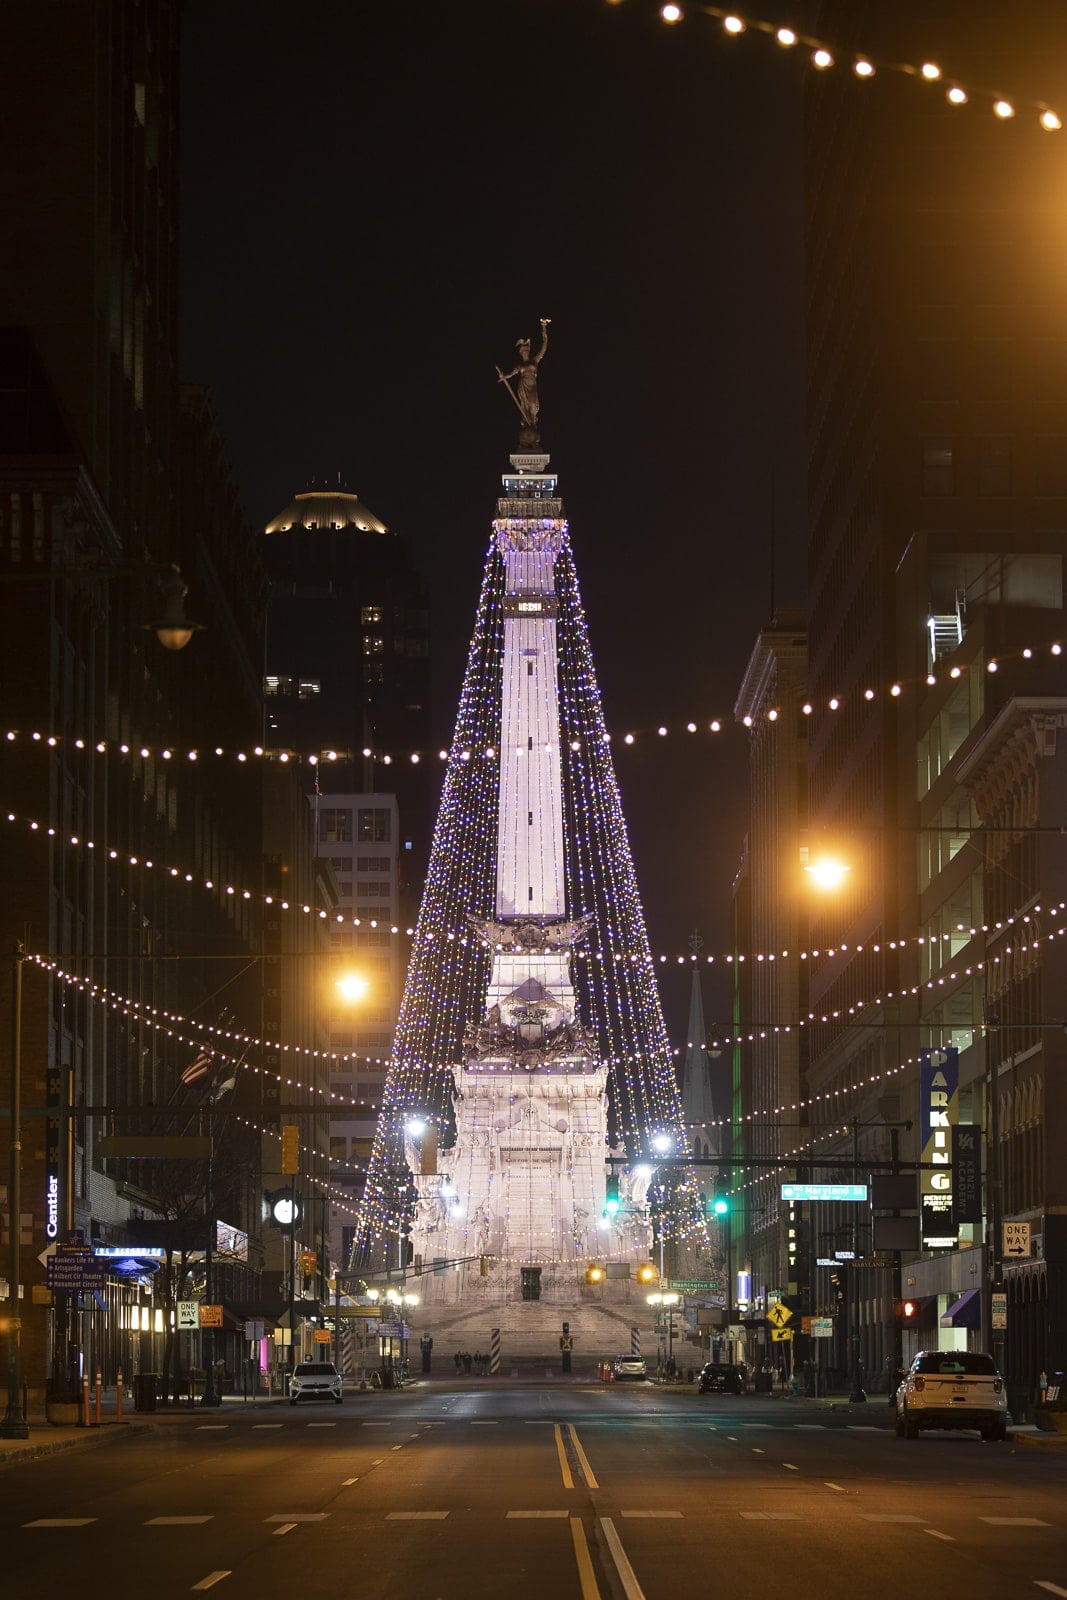 The World's Largest Christmas Tree in Indianapolis at Night